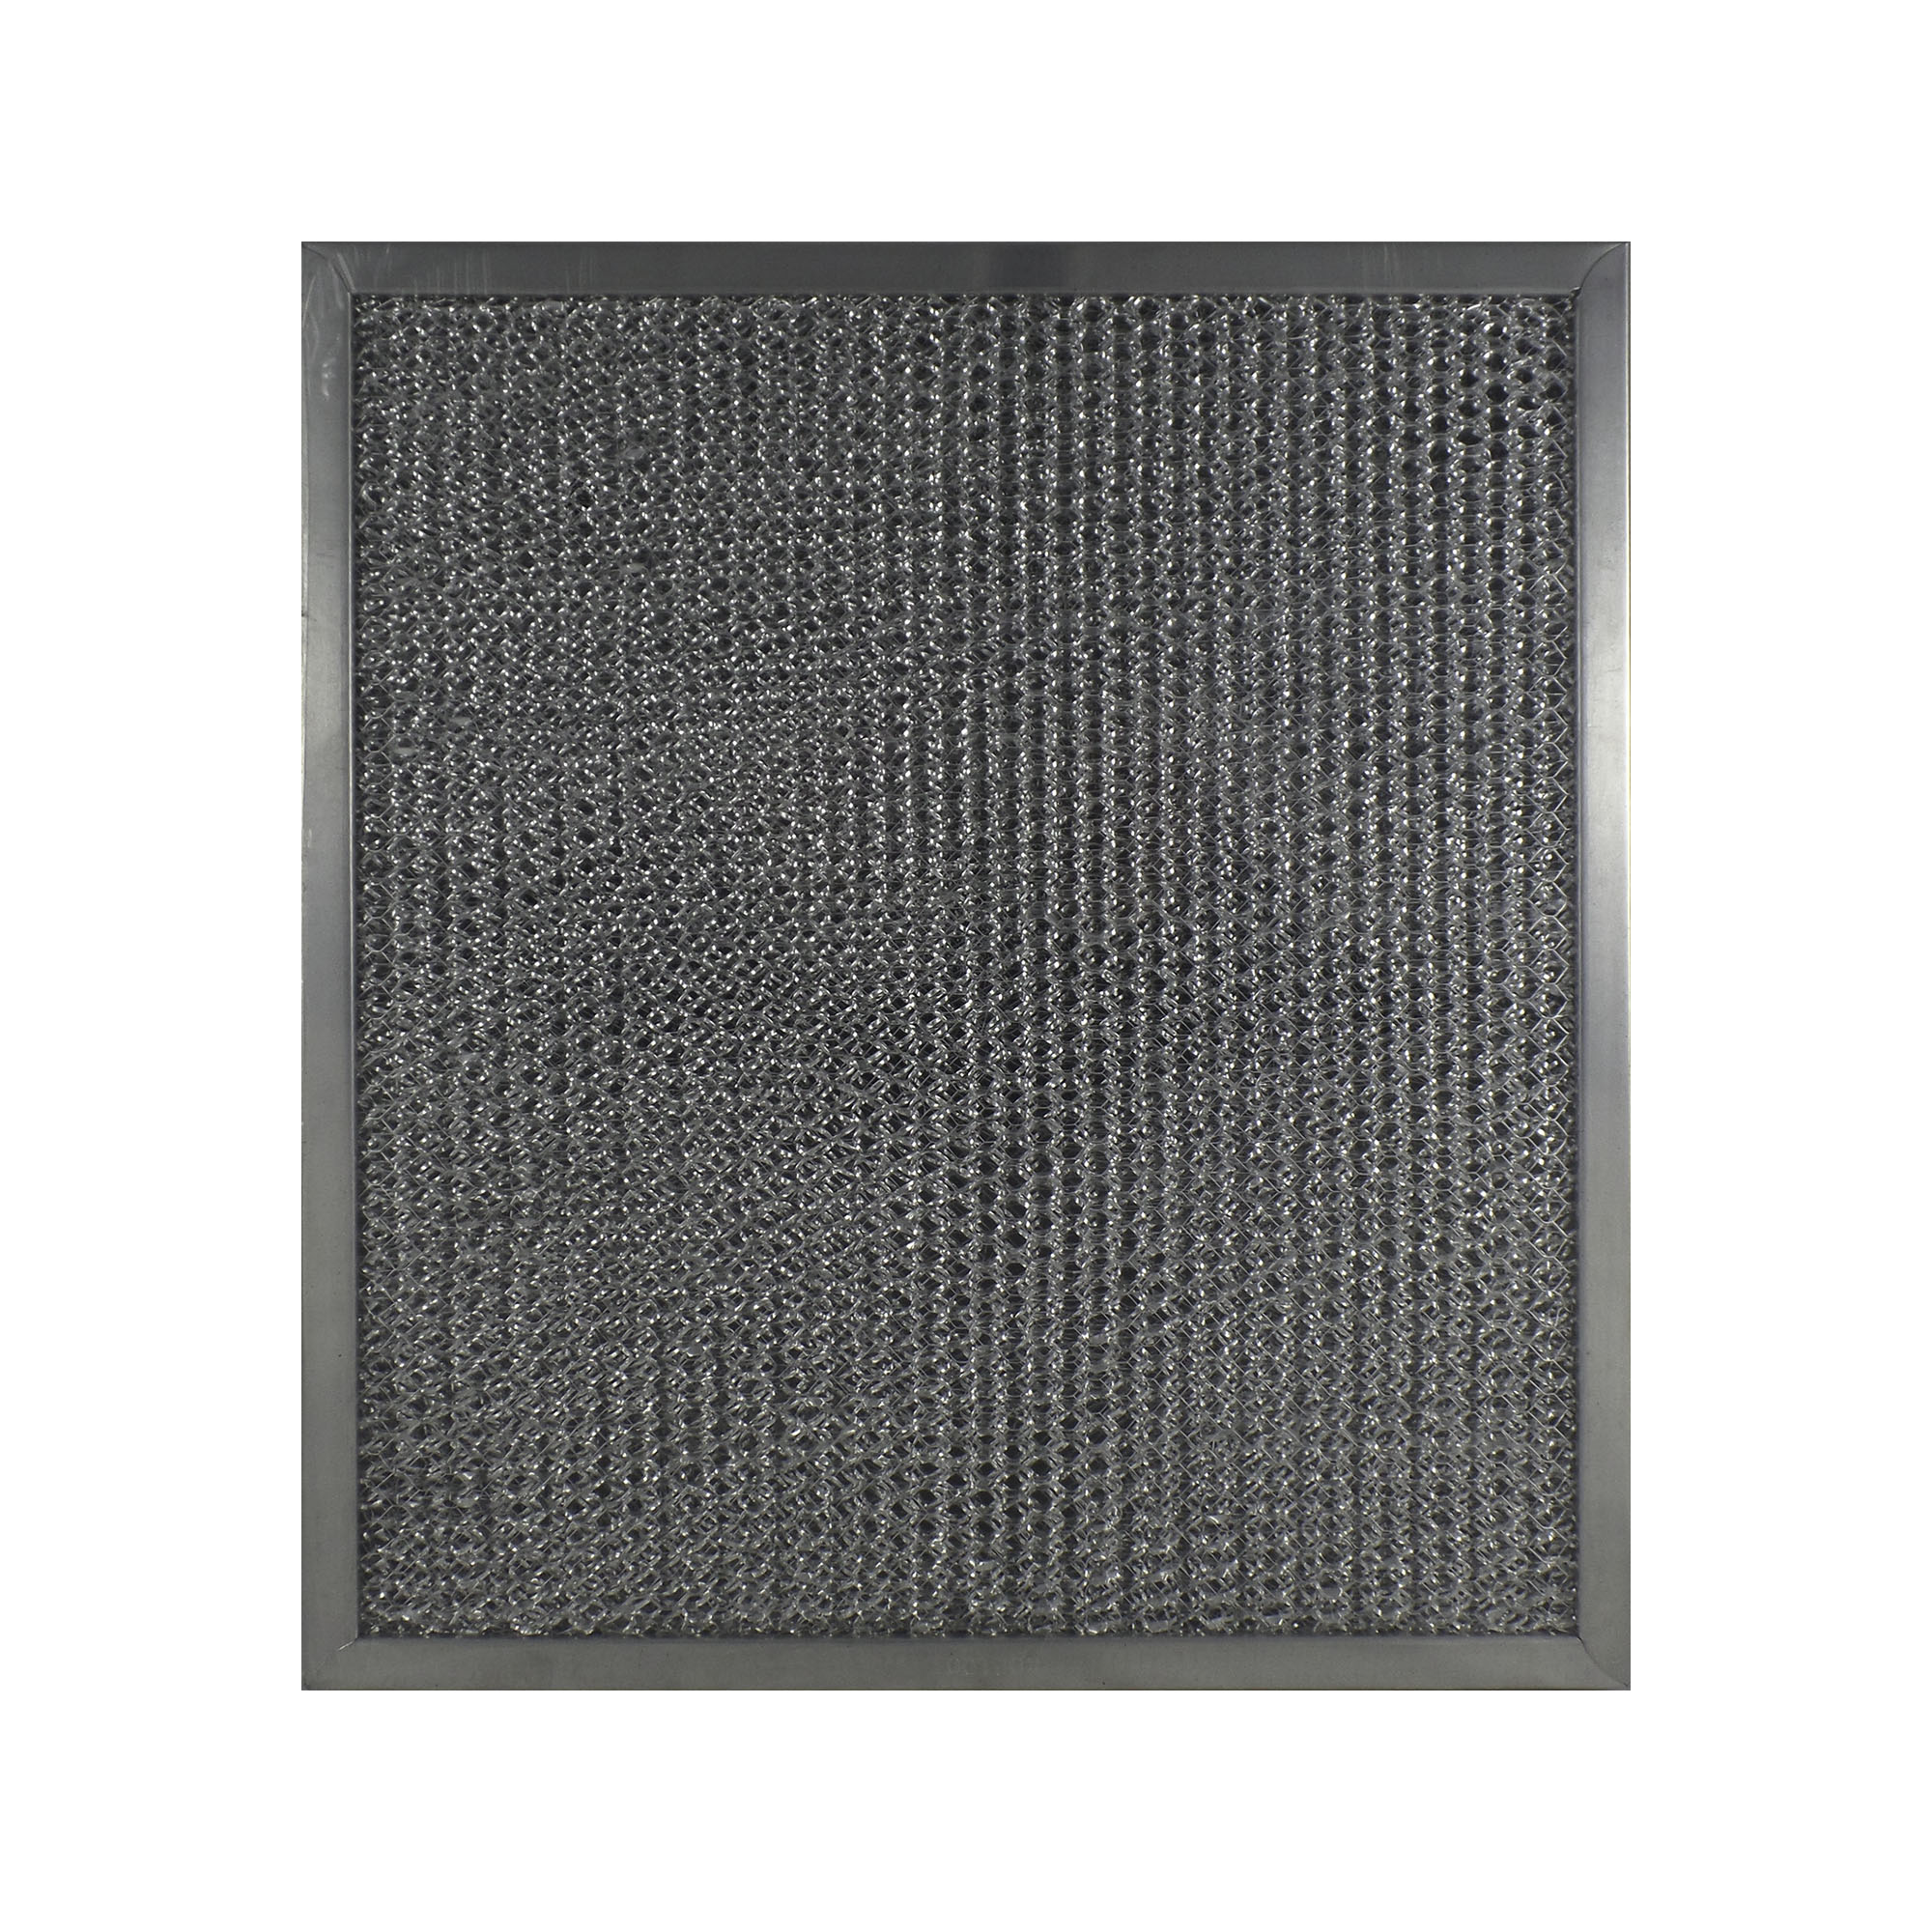 Broan Nutone LL62F  Range Hood Replacement Filter  NEW 